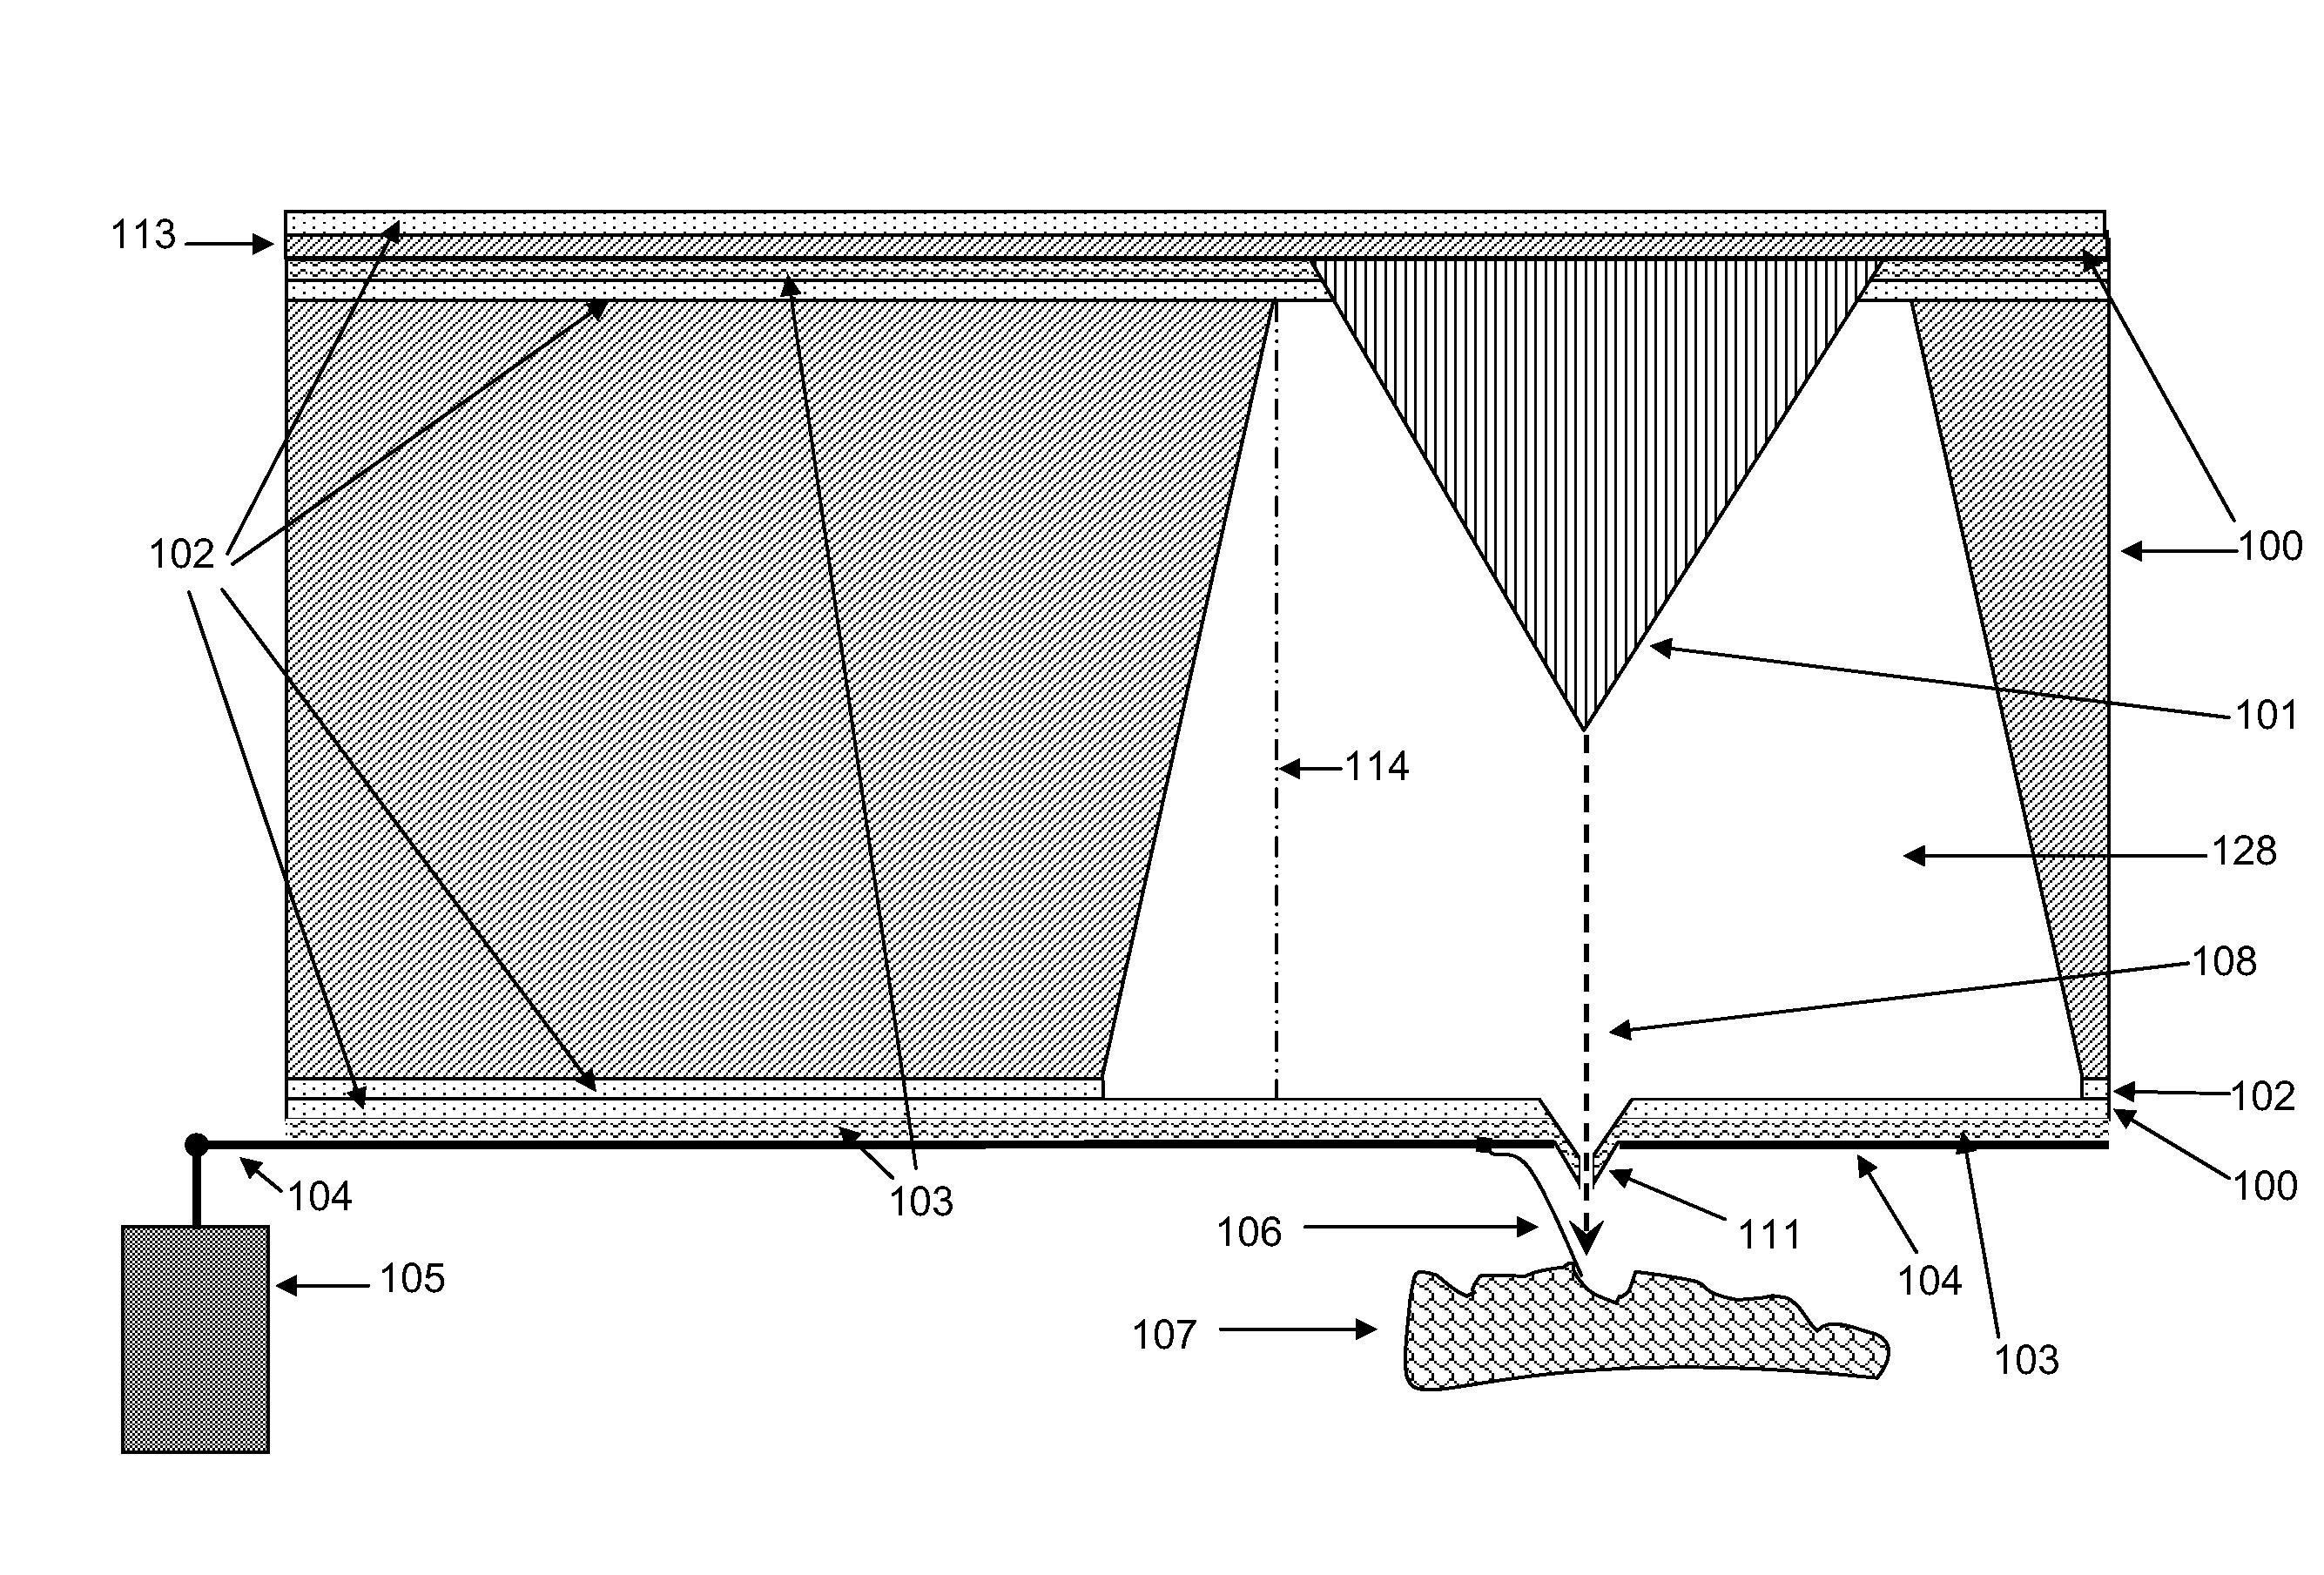 Micromachined electron or ion-beam source and secondary pickup for scanning probe microscopy or object modification